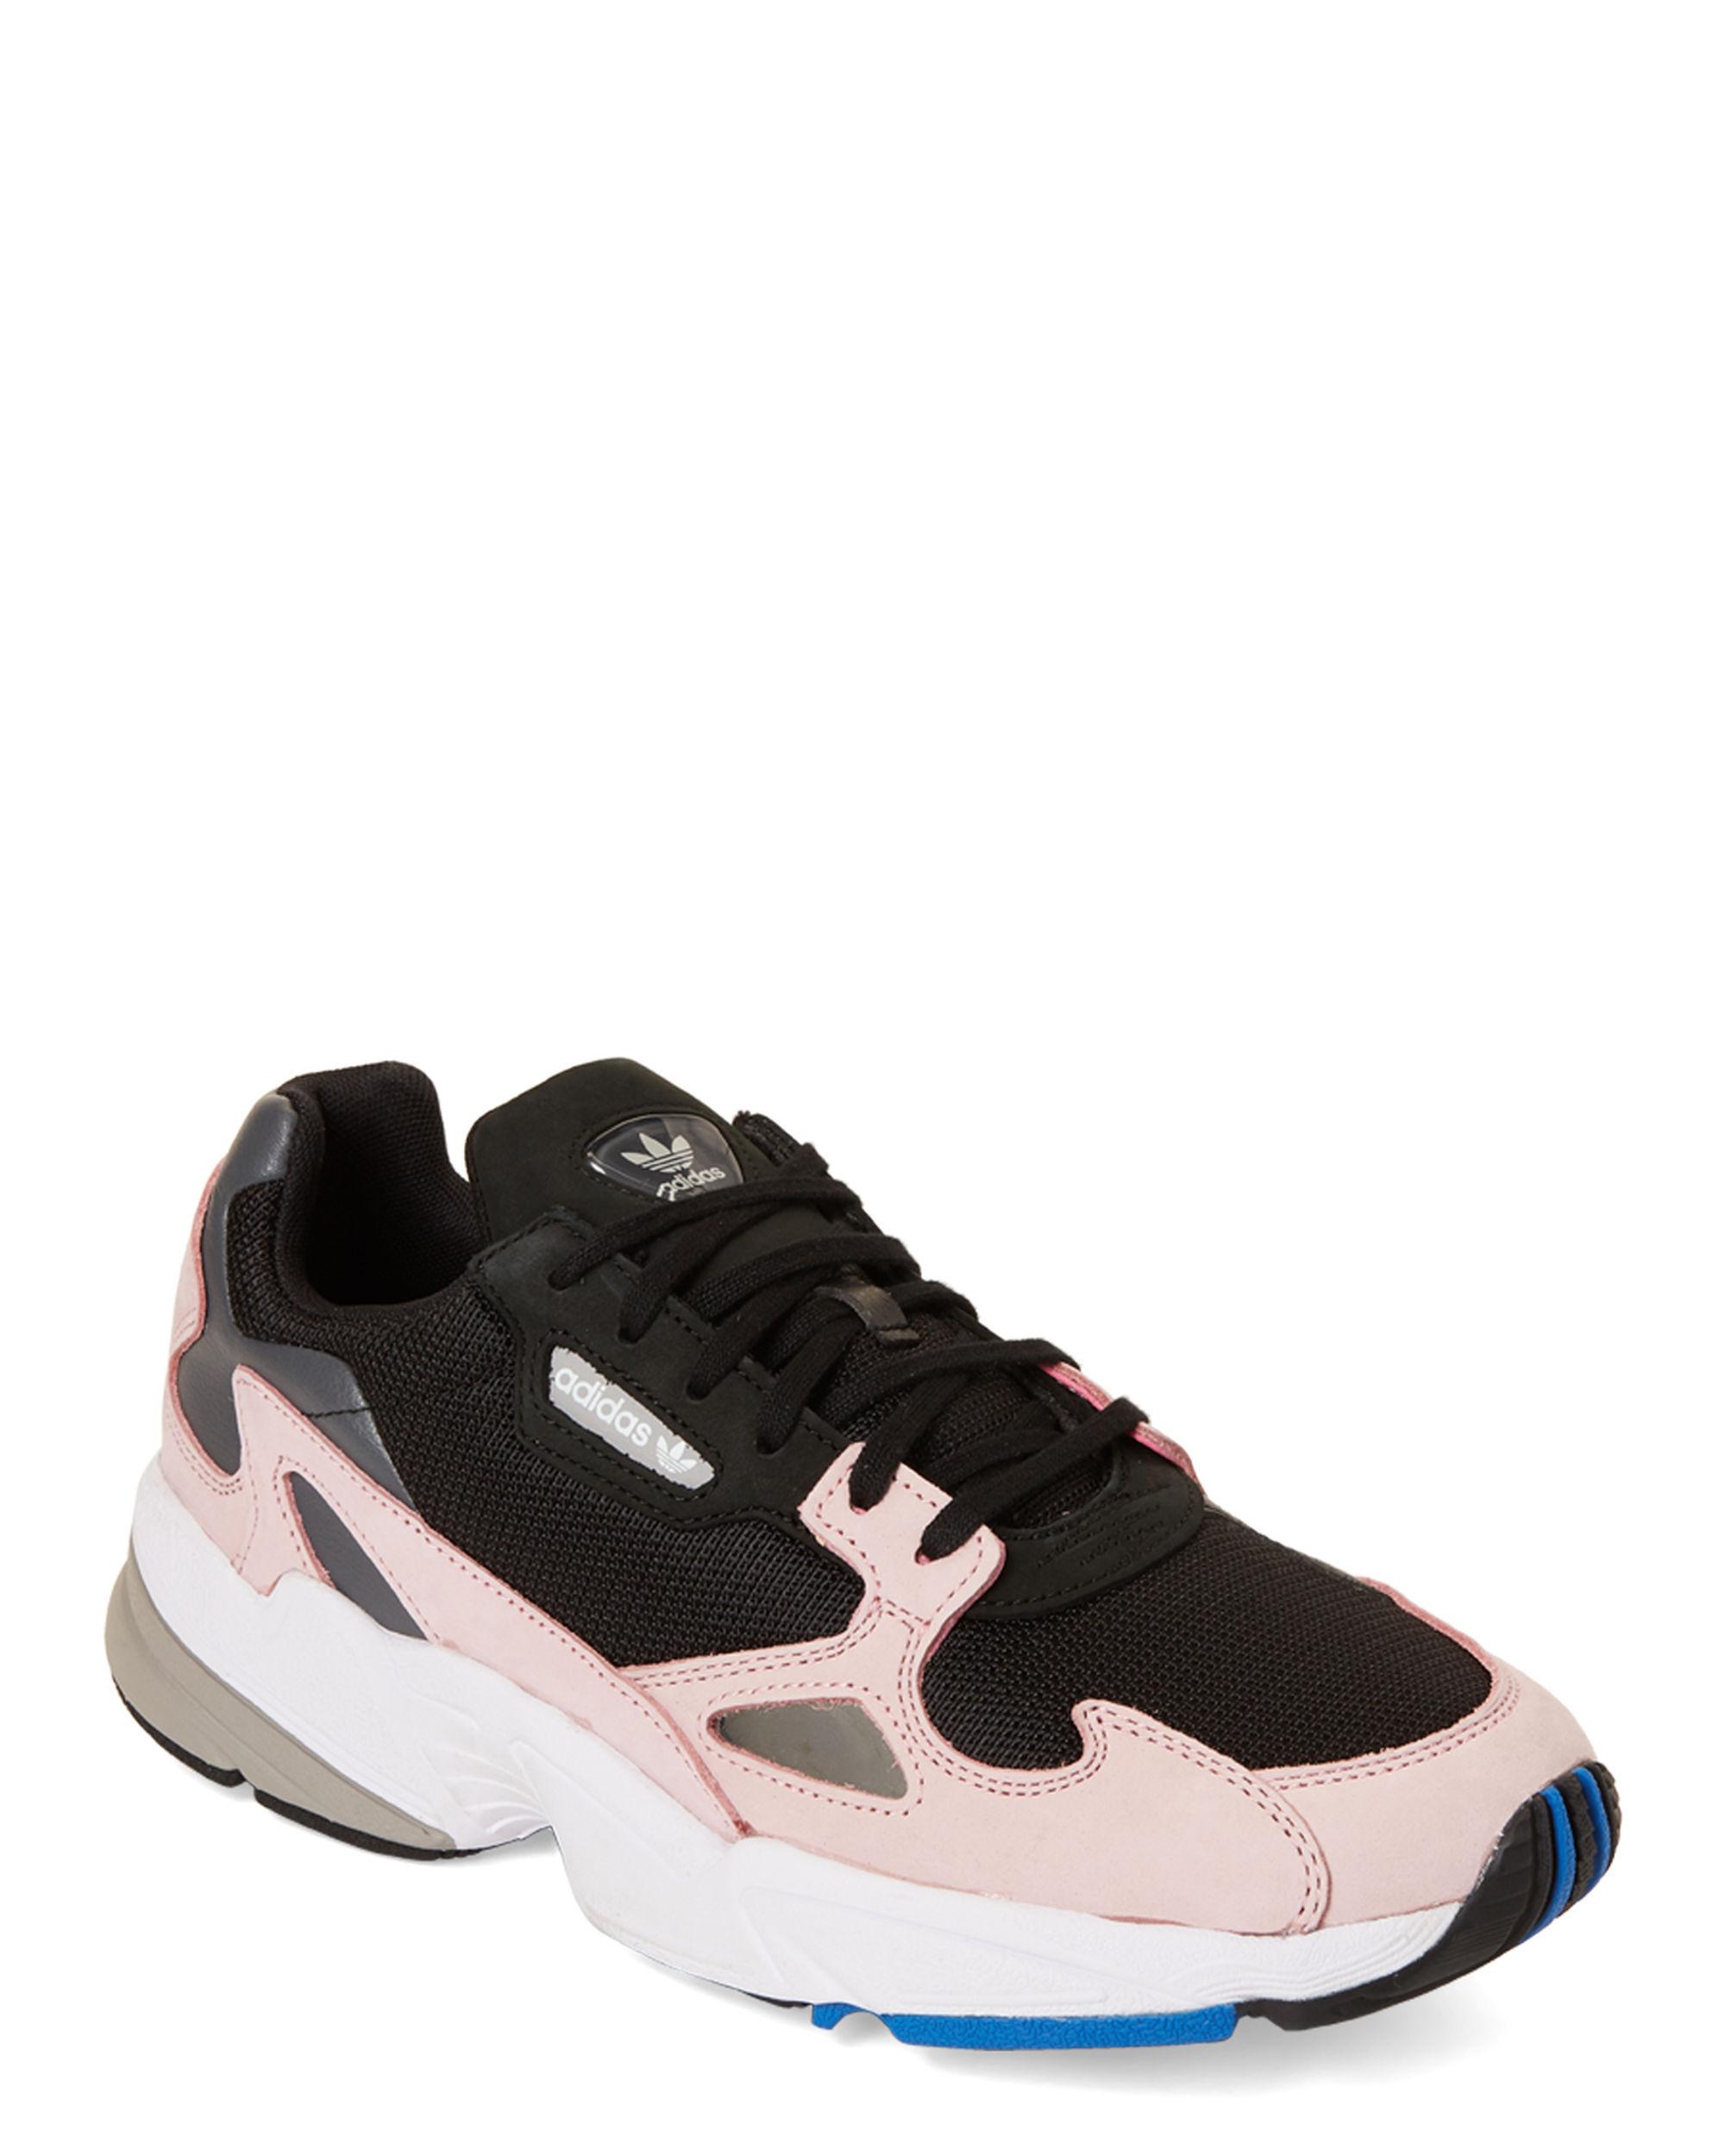 Lyst Adidas Black Light Pink Falcon Leather Low Top